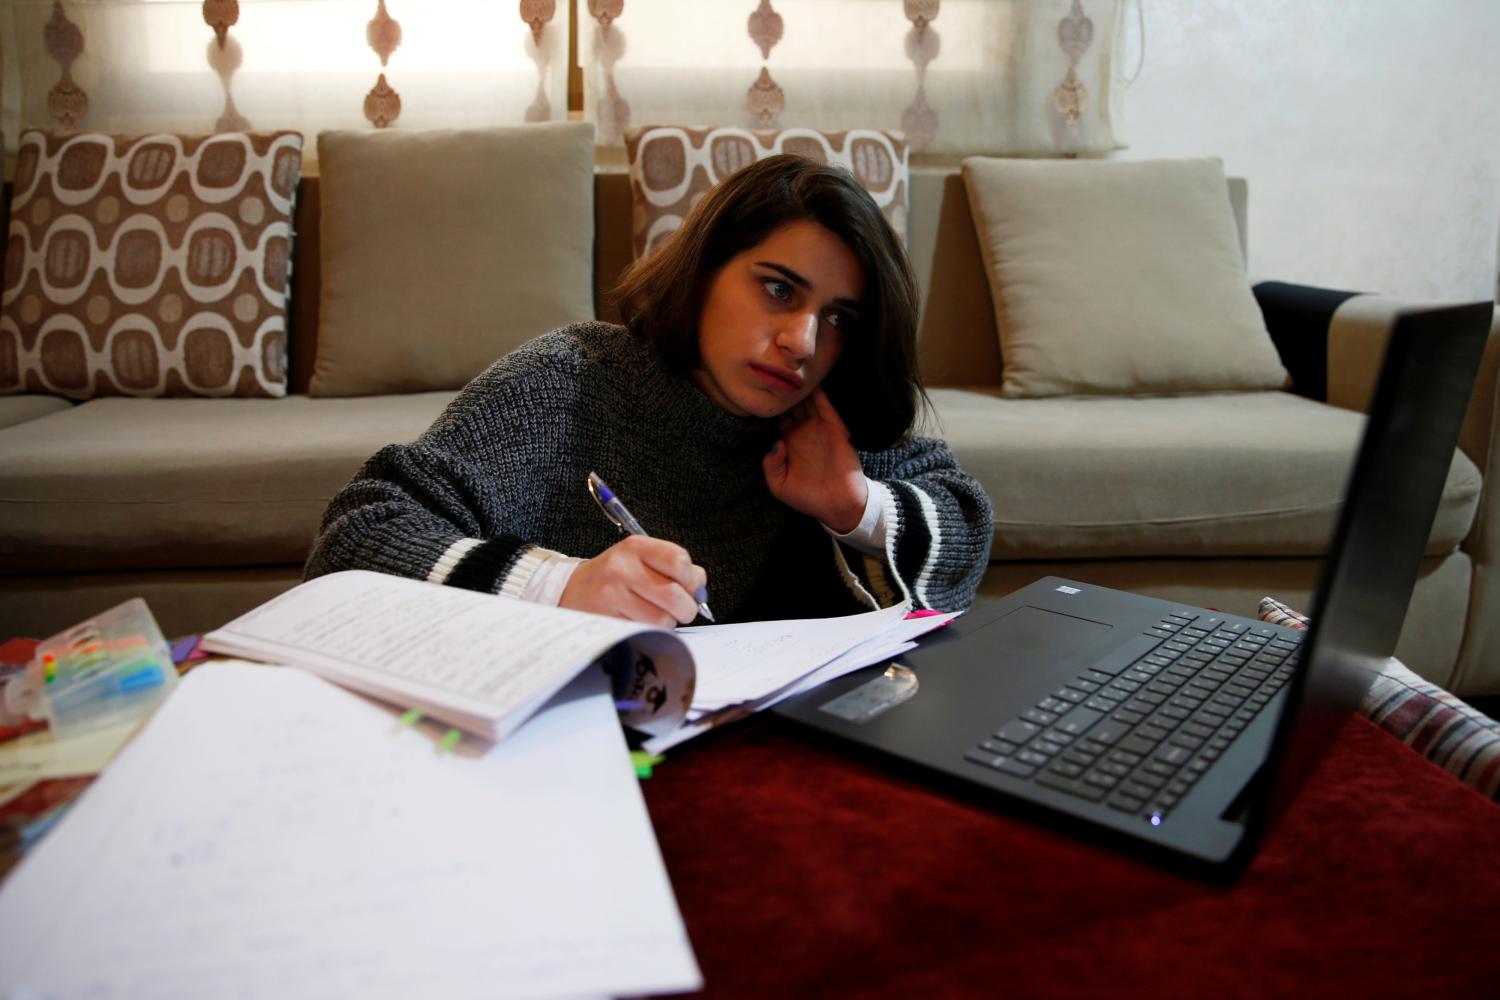 High school student, Mona Hussein participates in an online class at her home, after coronavirus lockdown forced schools to close, amid concerns over the spread of coronavirus disease (COVID-19), in Amman, Jordan March 23, 2020. Picture taken March 23, 2020. REUTERS/Muhammad Hamed